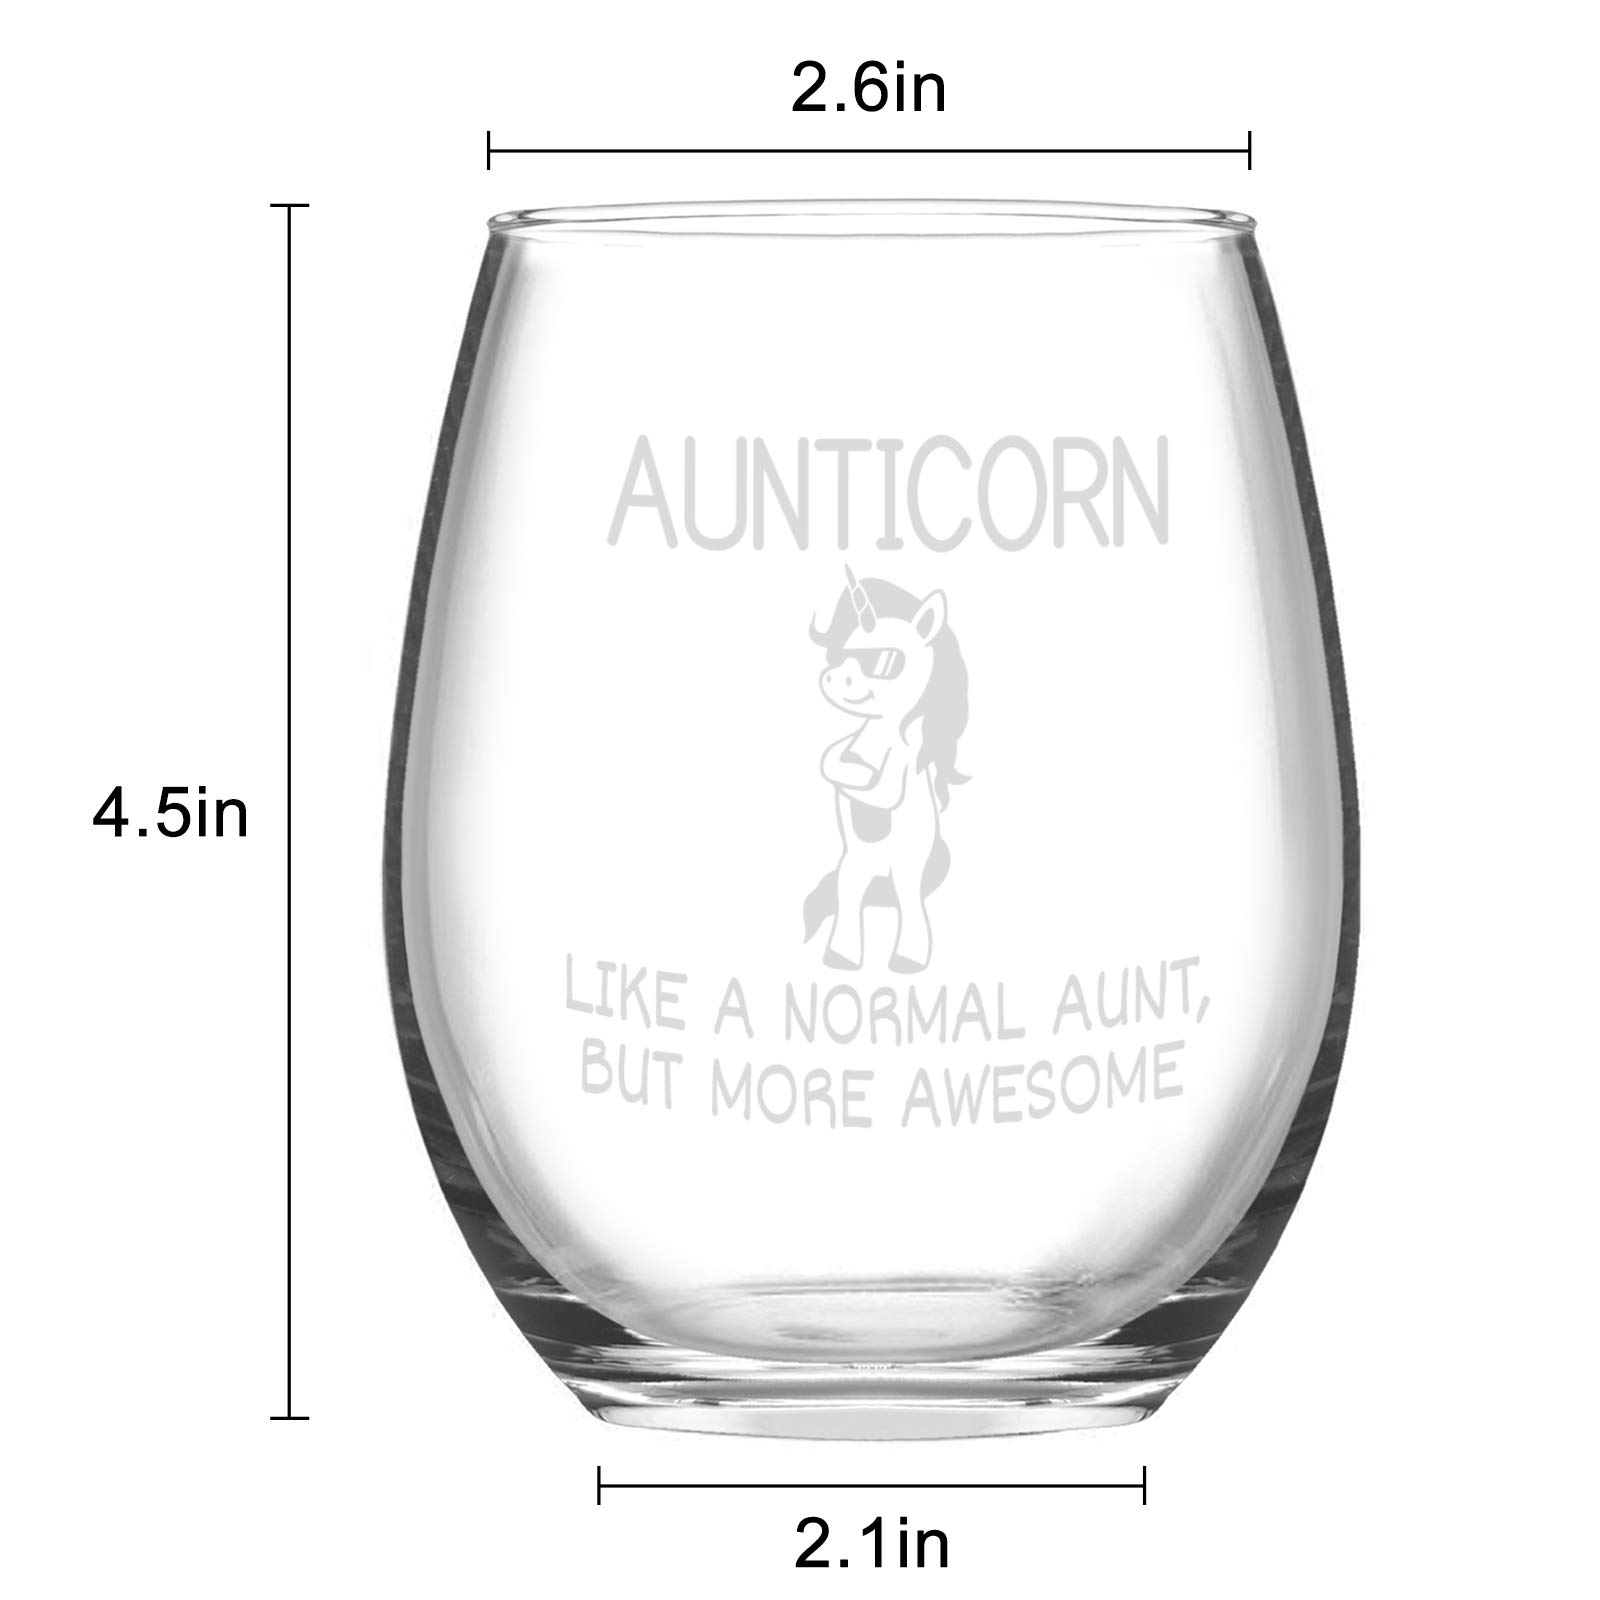 Futtumy Aunticorn Stemless Wine Glass, Aunt Gifts for Auntie Women Sister Mothers Day Christmas Birthday 15 Oz, Funny Unicorn Aunt Wine Glass Gifts from Niece Nephew